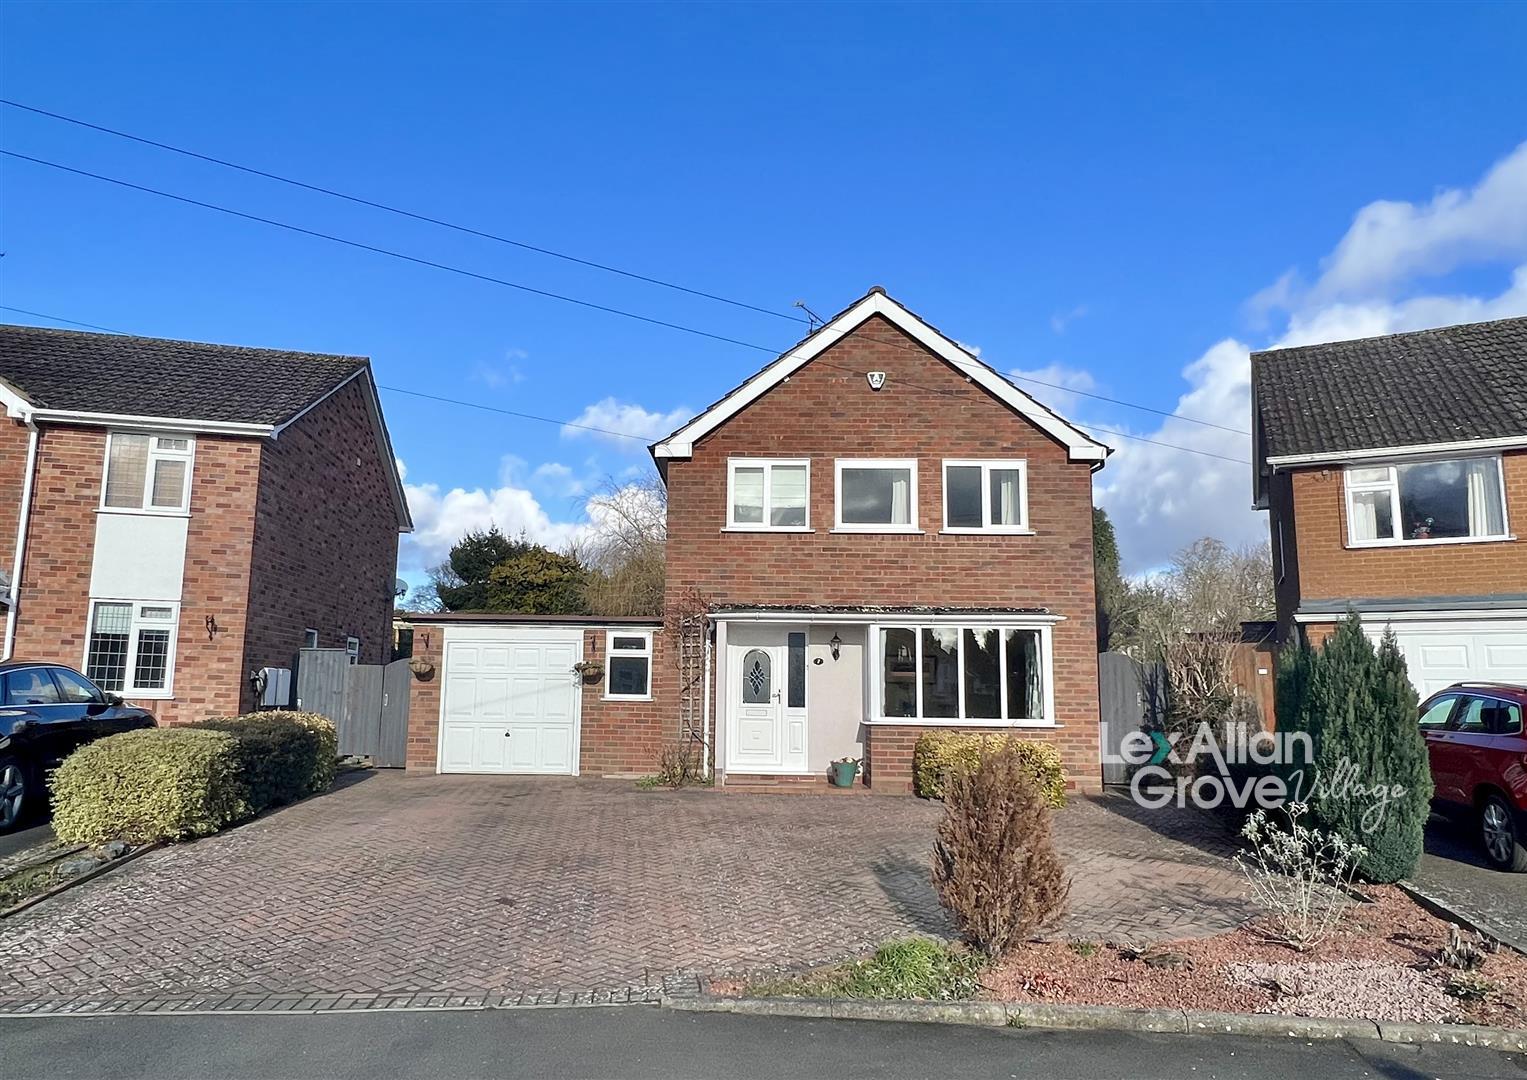 3 bed detached house for sale in Lodge Crescent, Stourbridge, DY9 